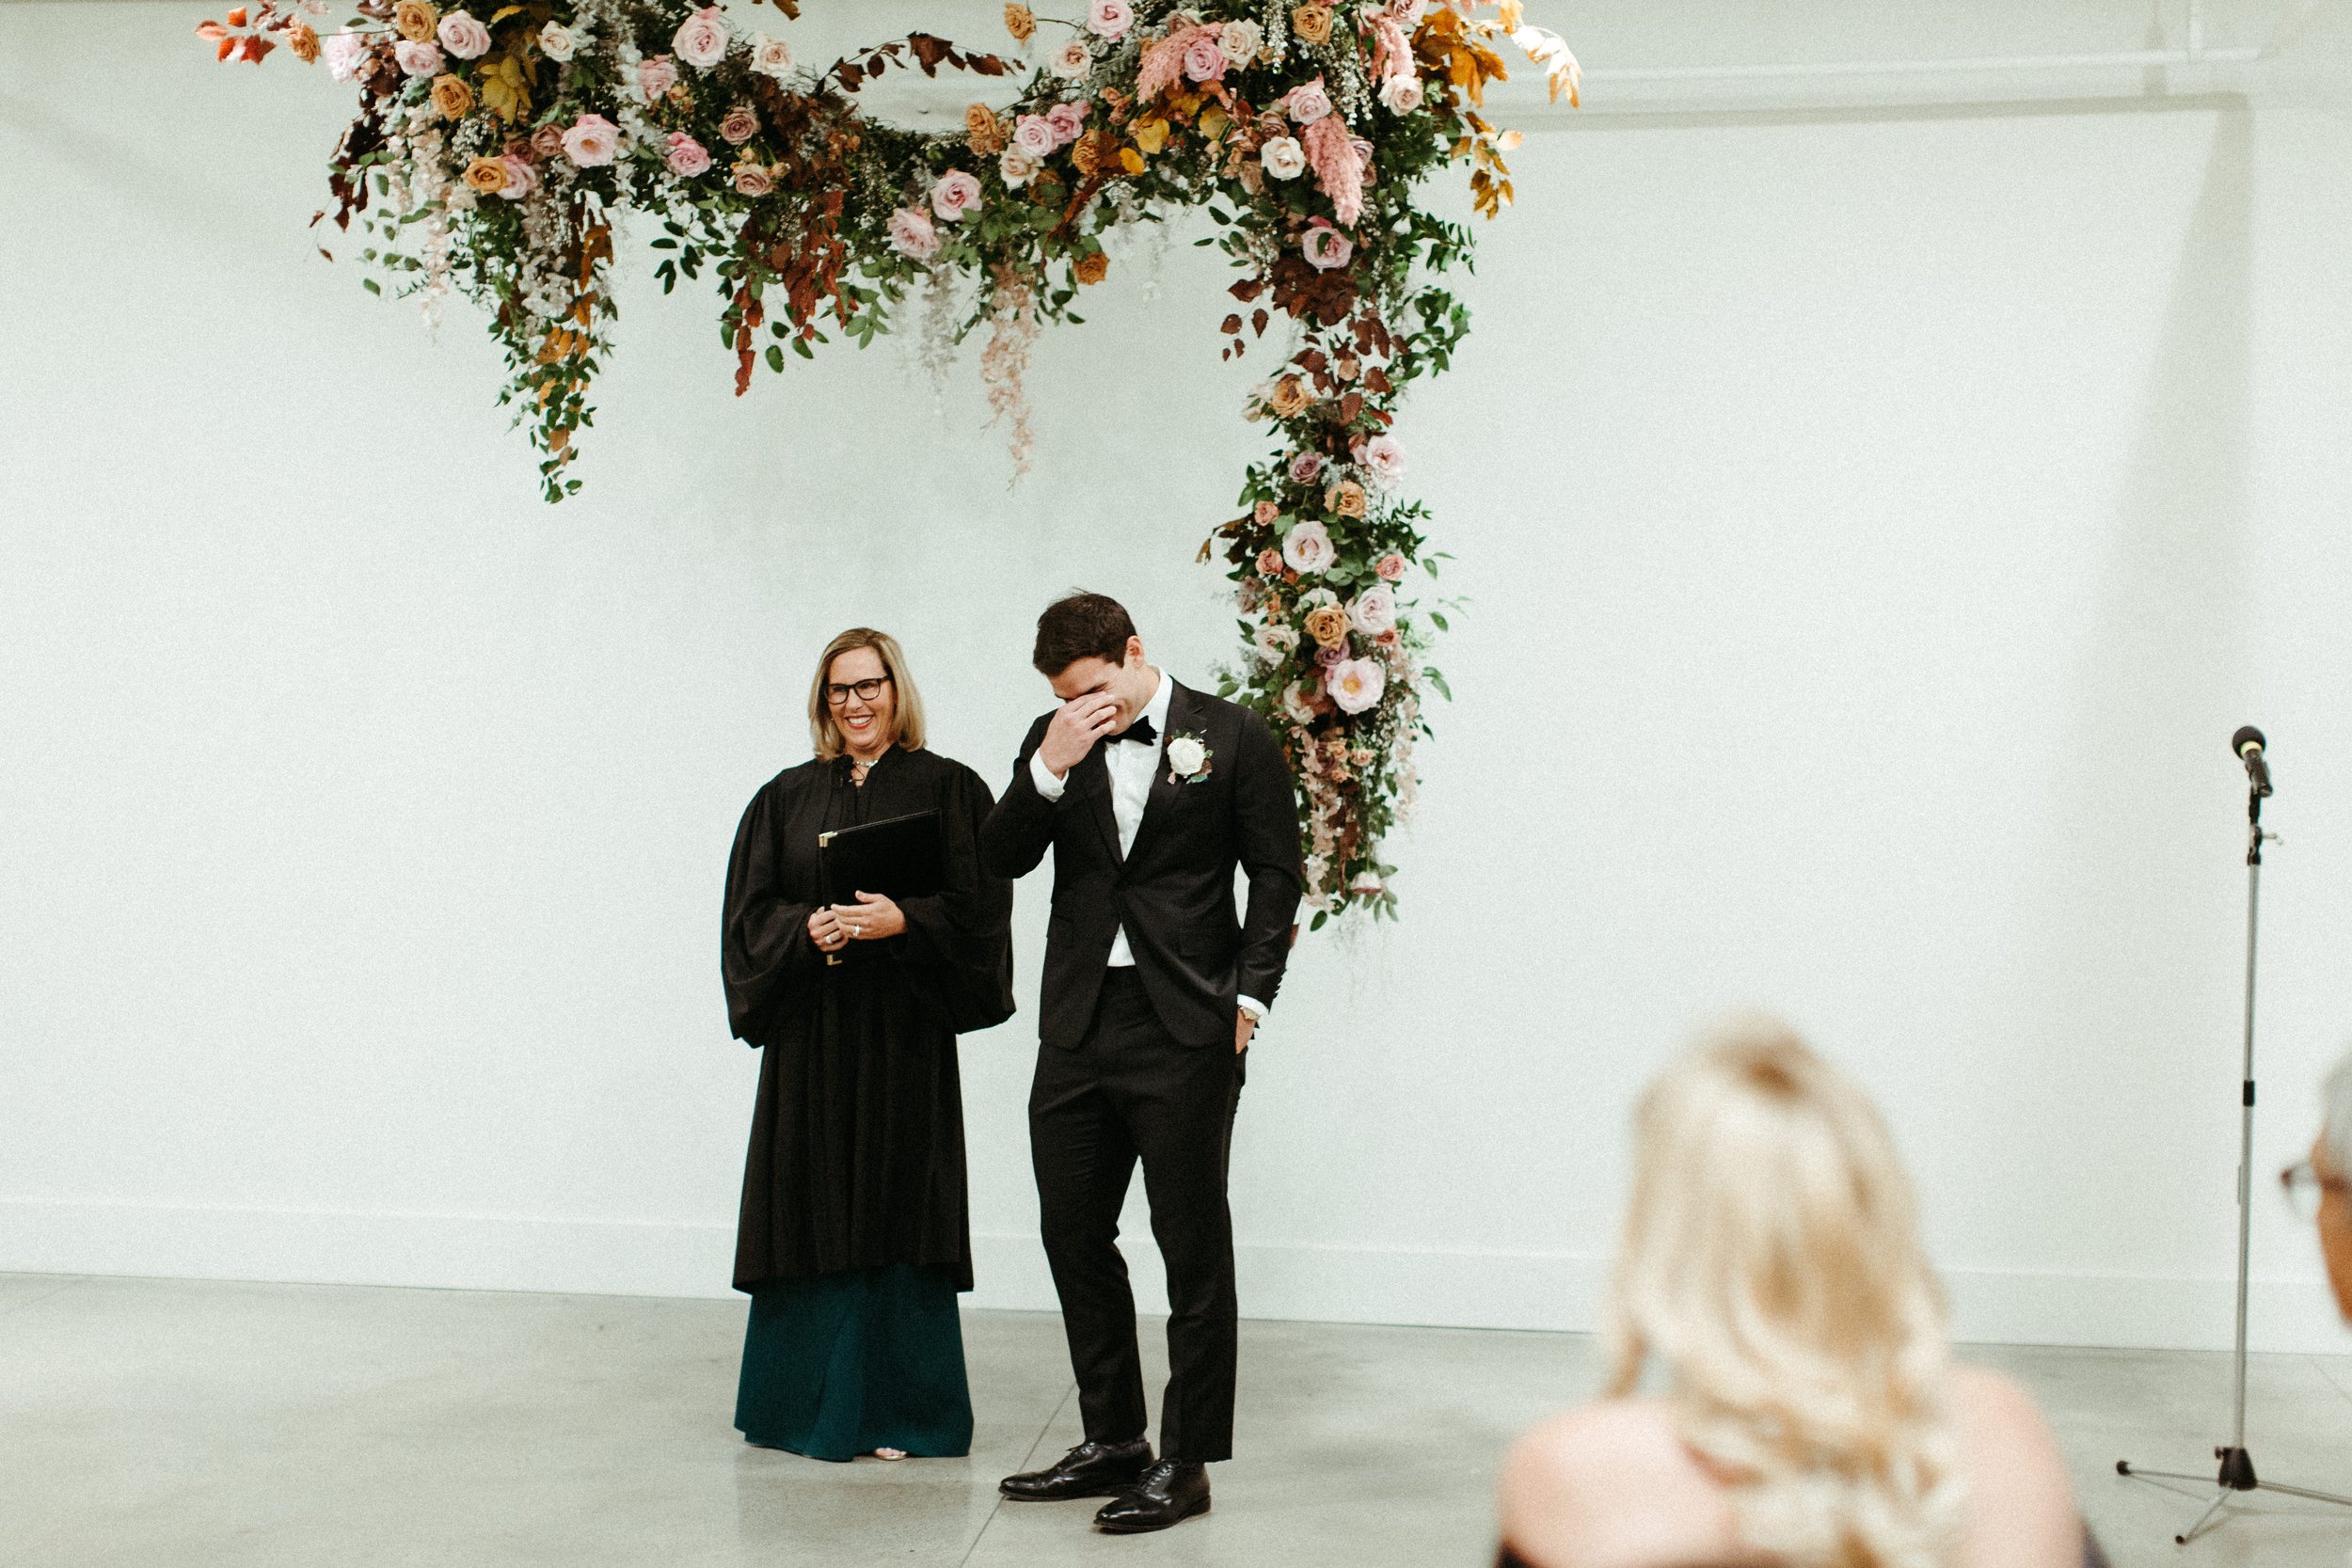 An eye-catching whimsical installation full of petal heavy roses and copper beech was the highlight of this art deco wedding. Terra cotta, burgundy, dusty pink, and other neutral florals warm up this ceremony. Designed by Rosemary and Finch in Nashvi